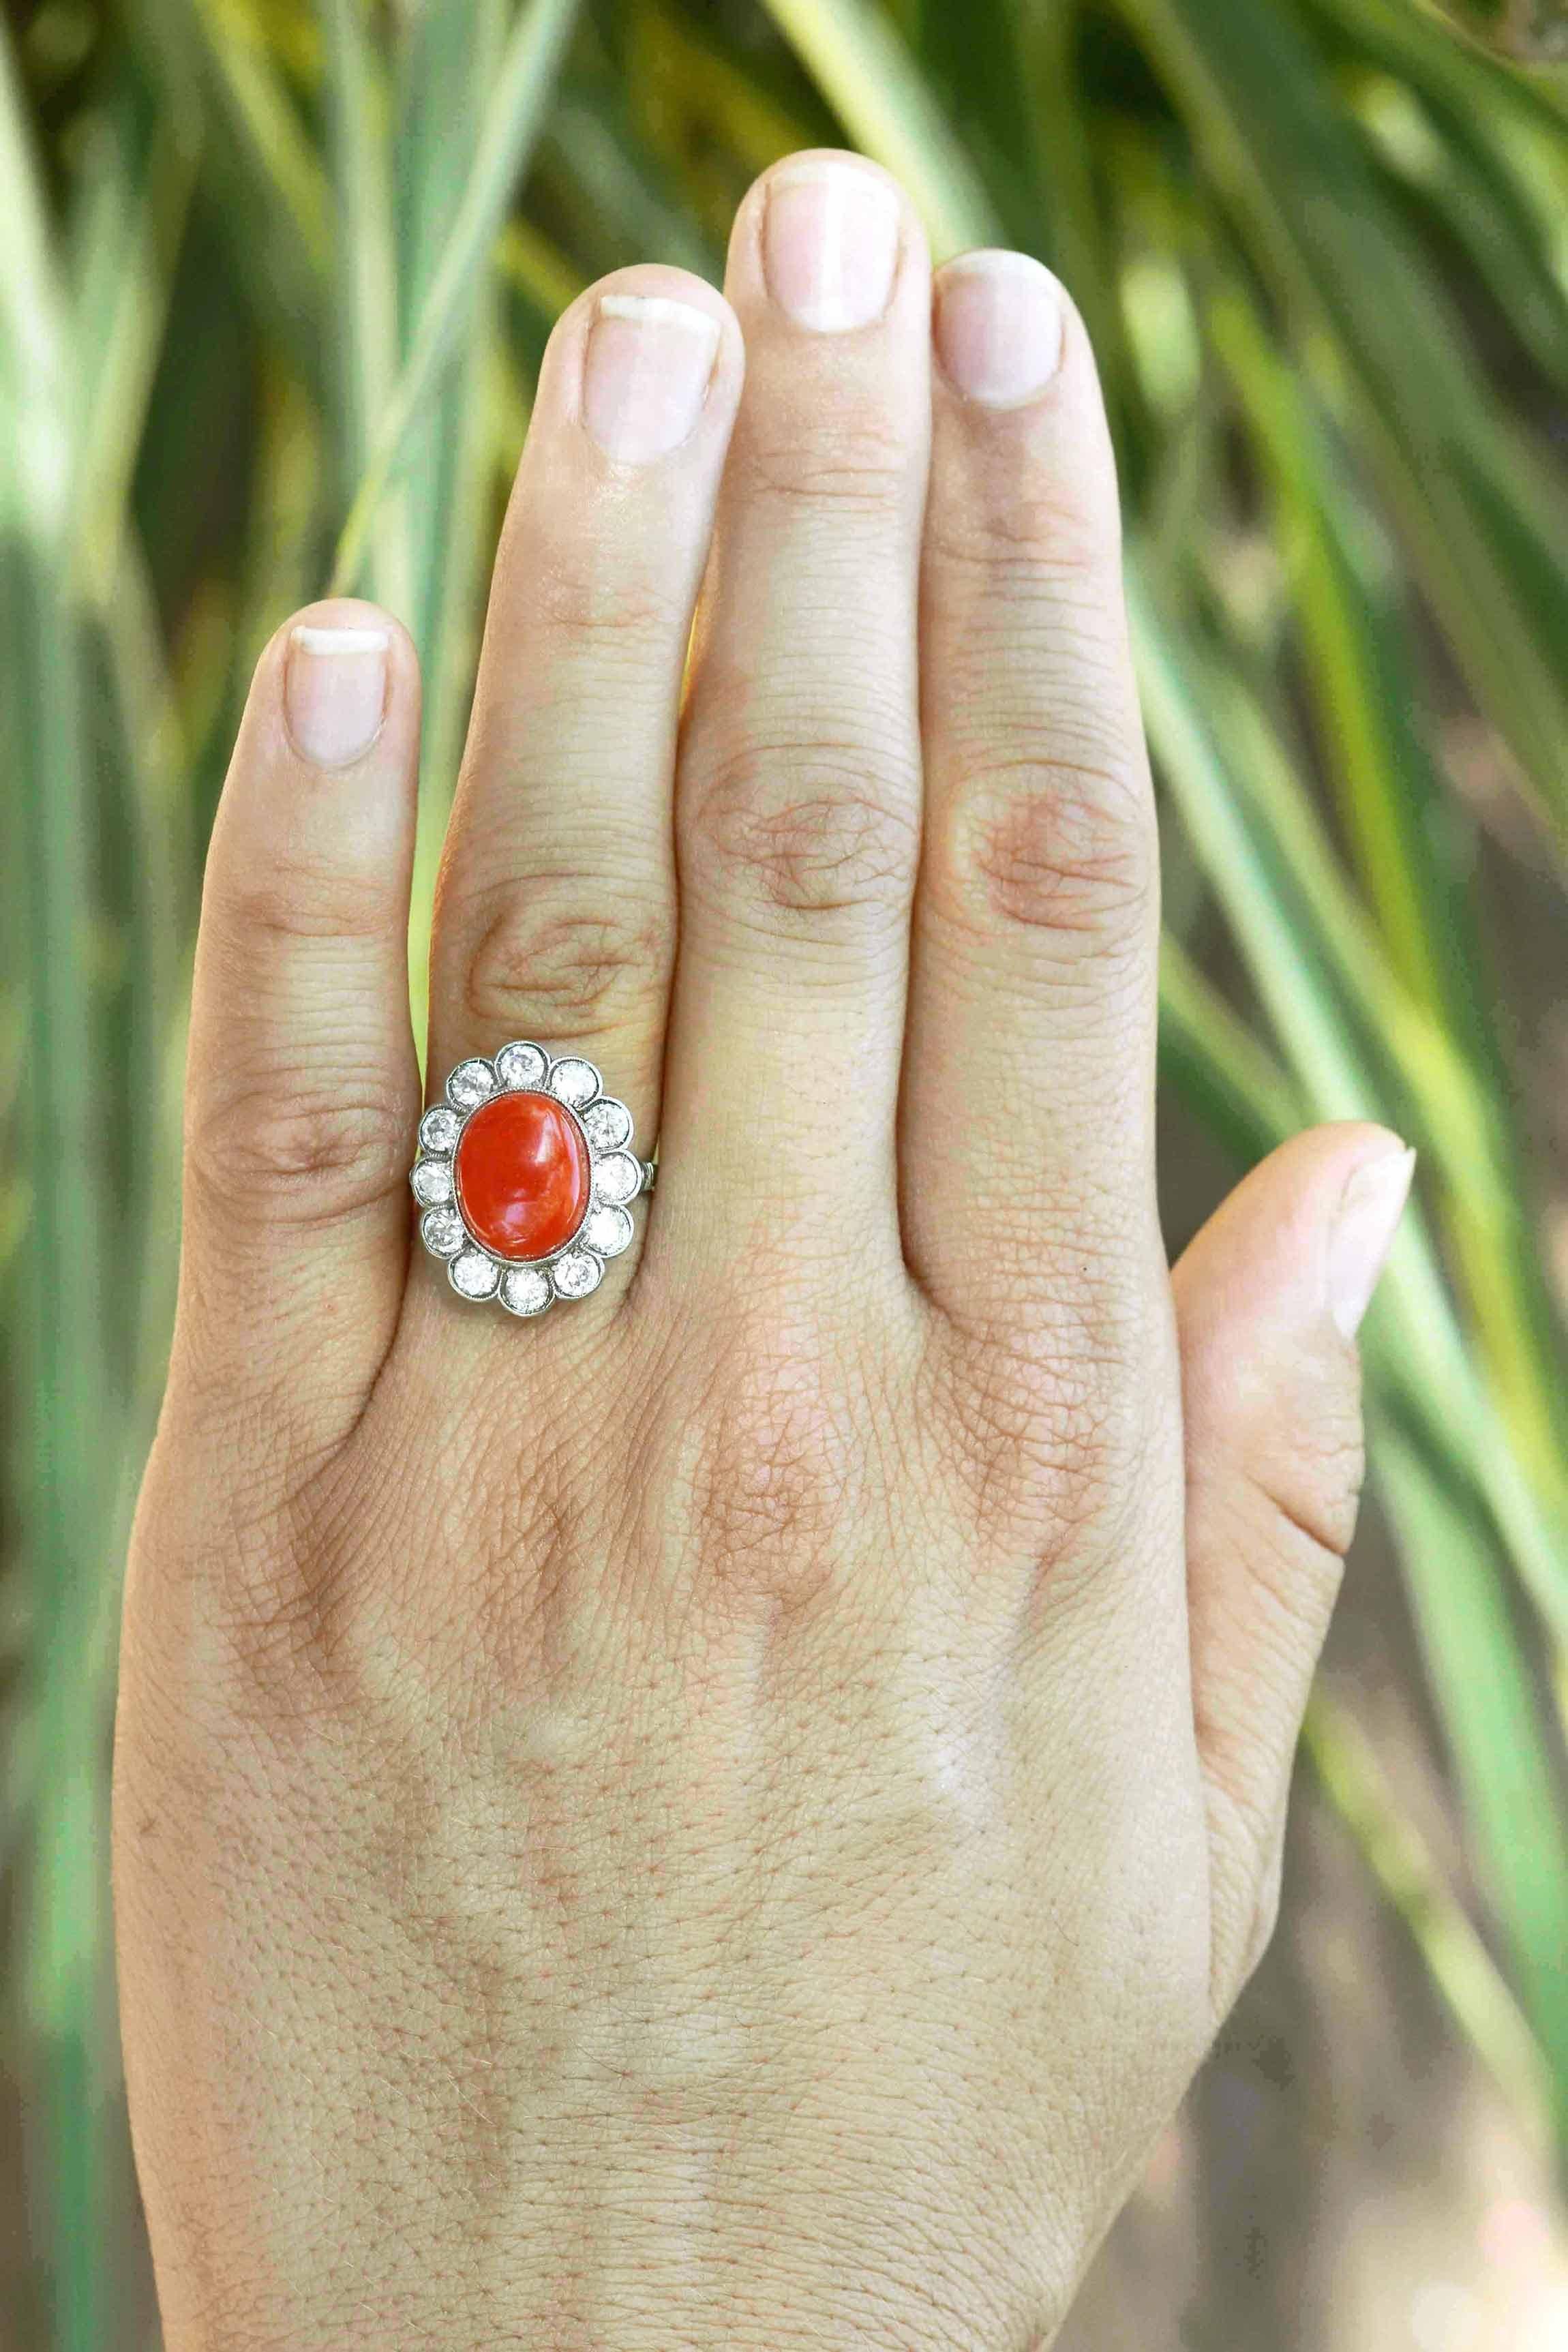 The Santa Fe Retro era ox blood coral and diamond dome is a stunning cocktail ring. An attention-grabbing cluster boasting a lush, ox blood red 6 carat cabochon smartly surrounded by a scalloped milgrain halo of a dozen old European cut brilliant